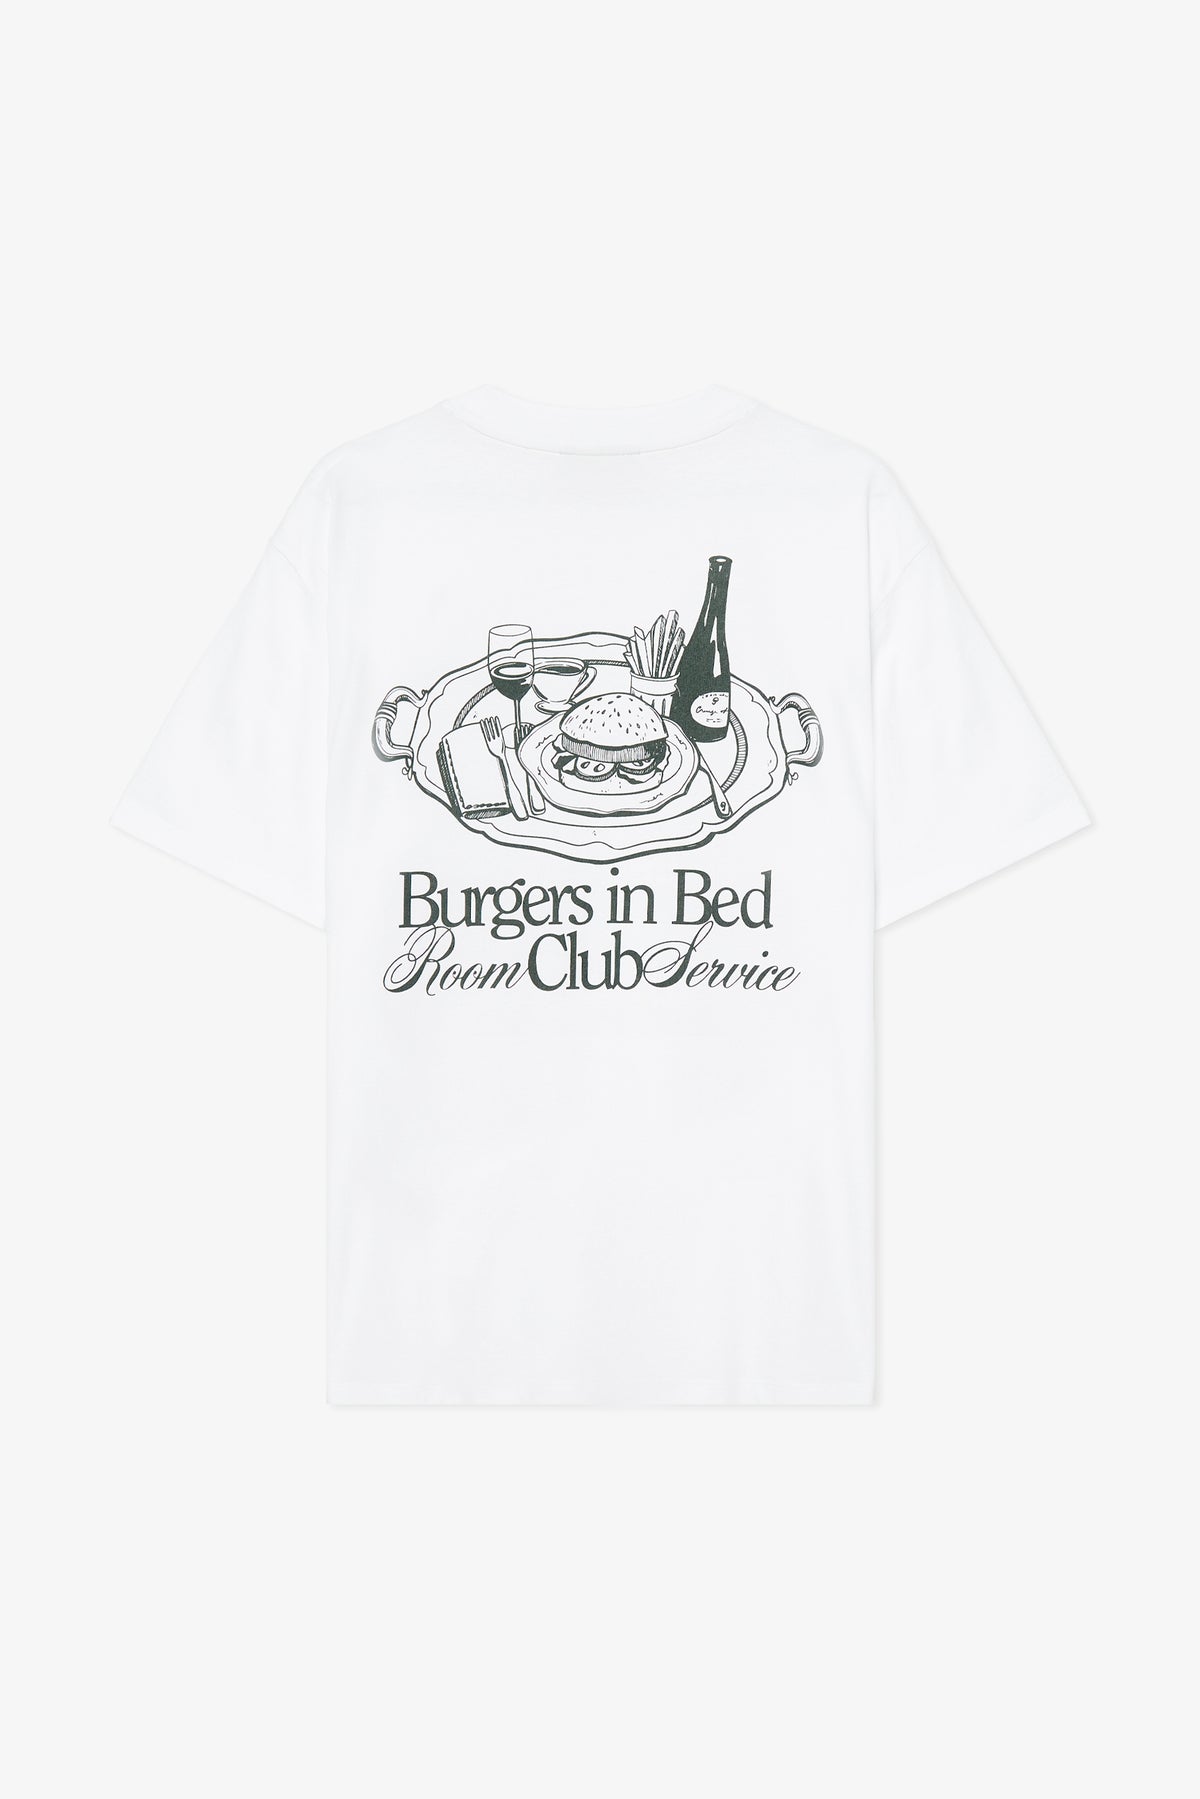 T-SHIRT GRÁFICA "BURGERS IN BED